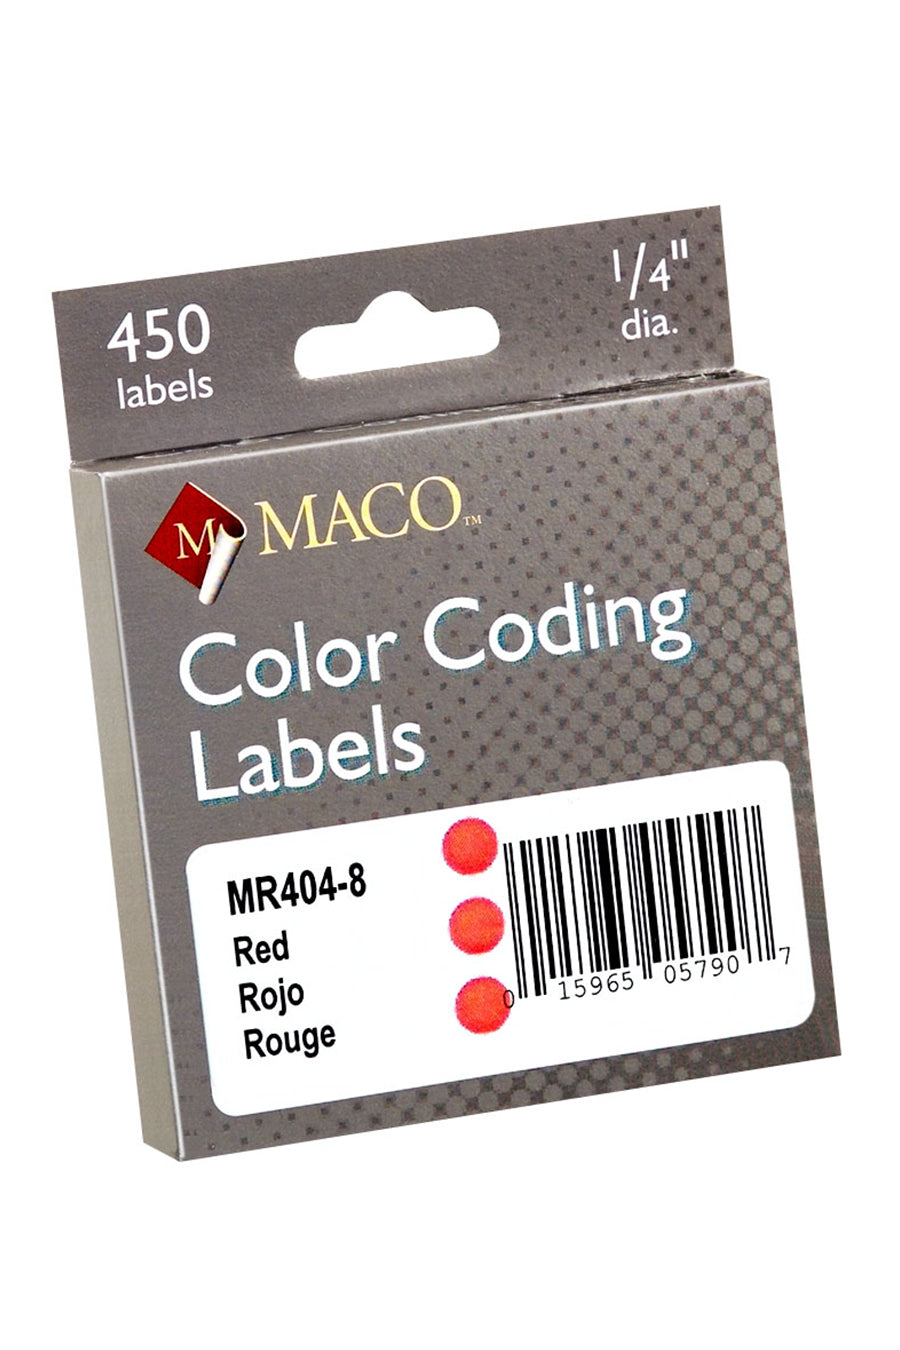 1/4" Dia. Color Coding Labels, Red, 450/On Roll in Dispenser Box